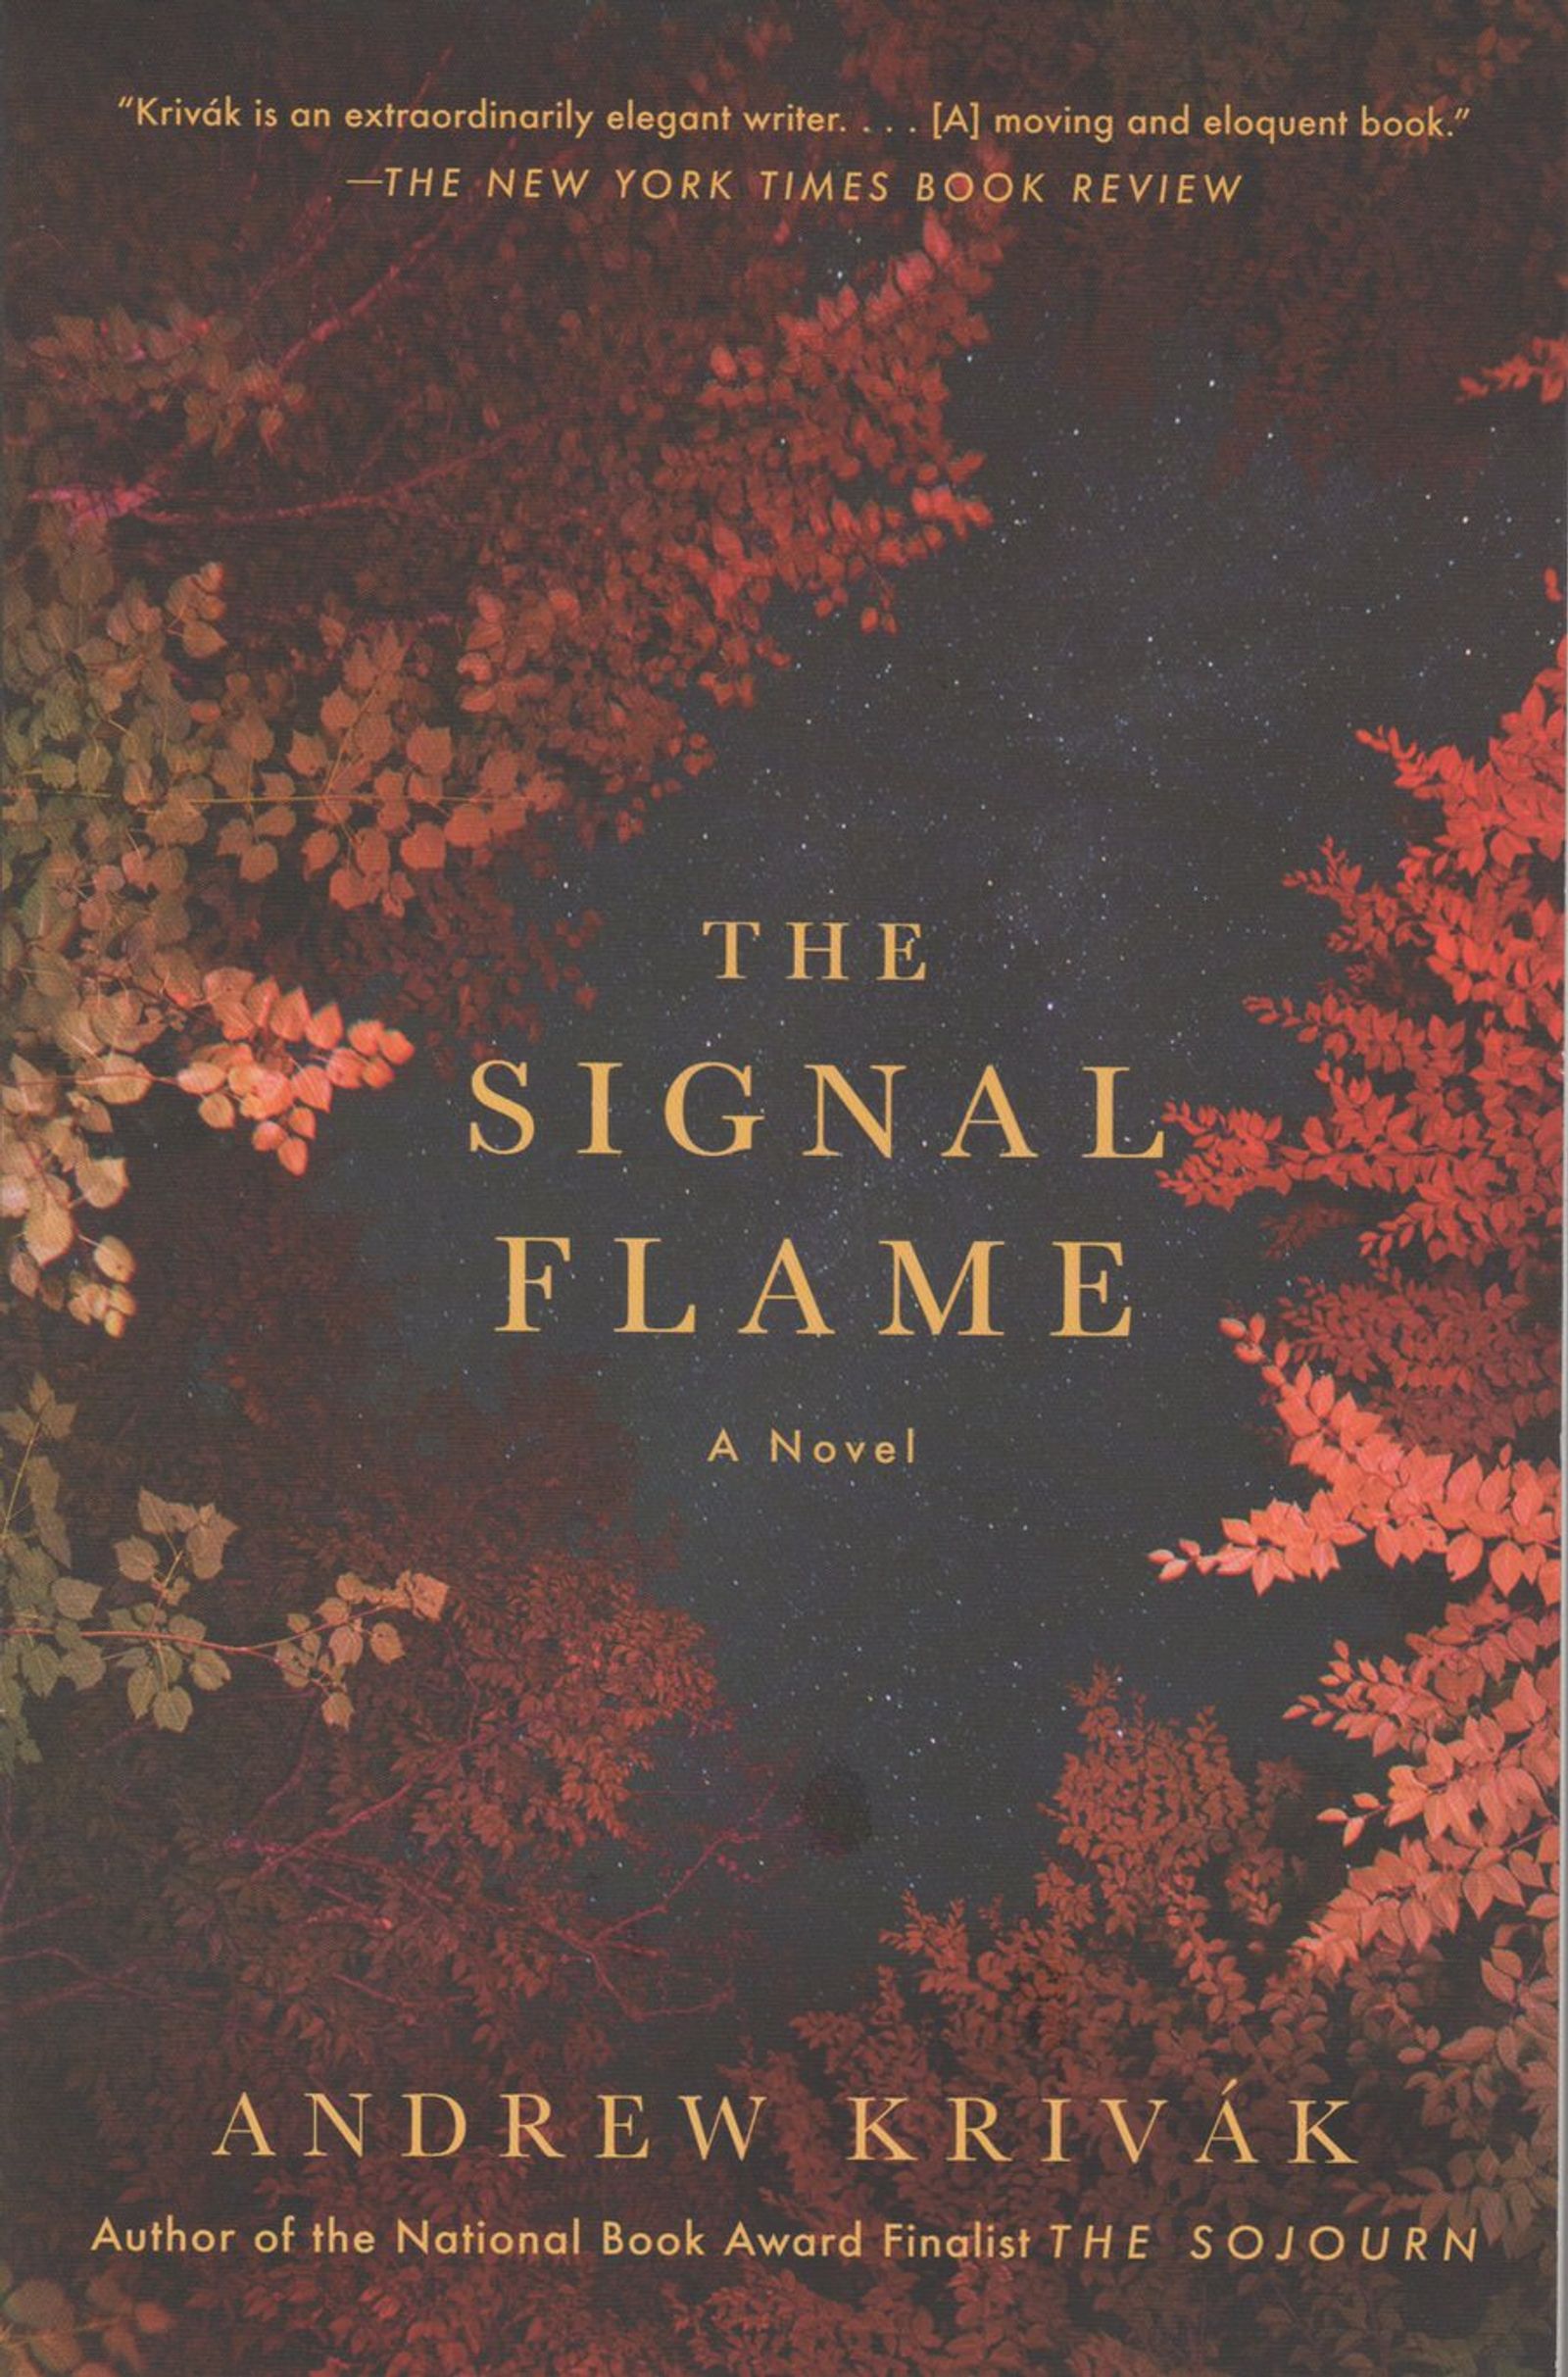 cover image of the book false